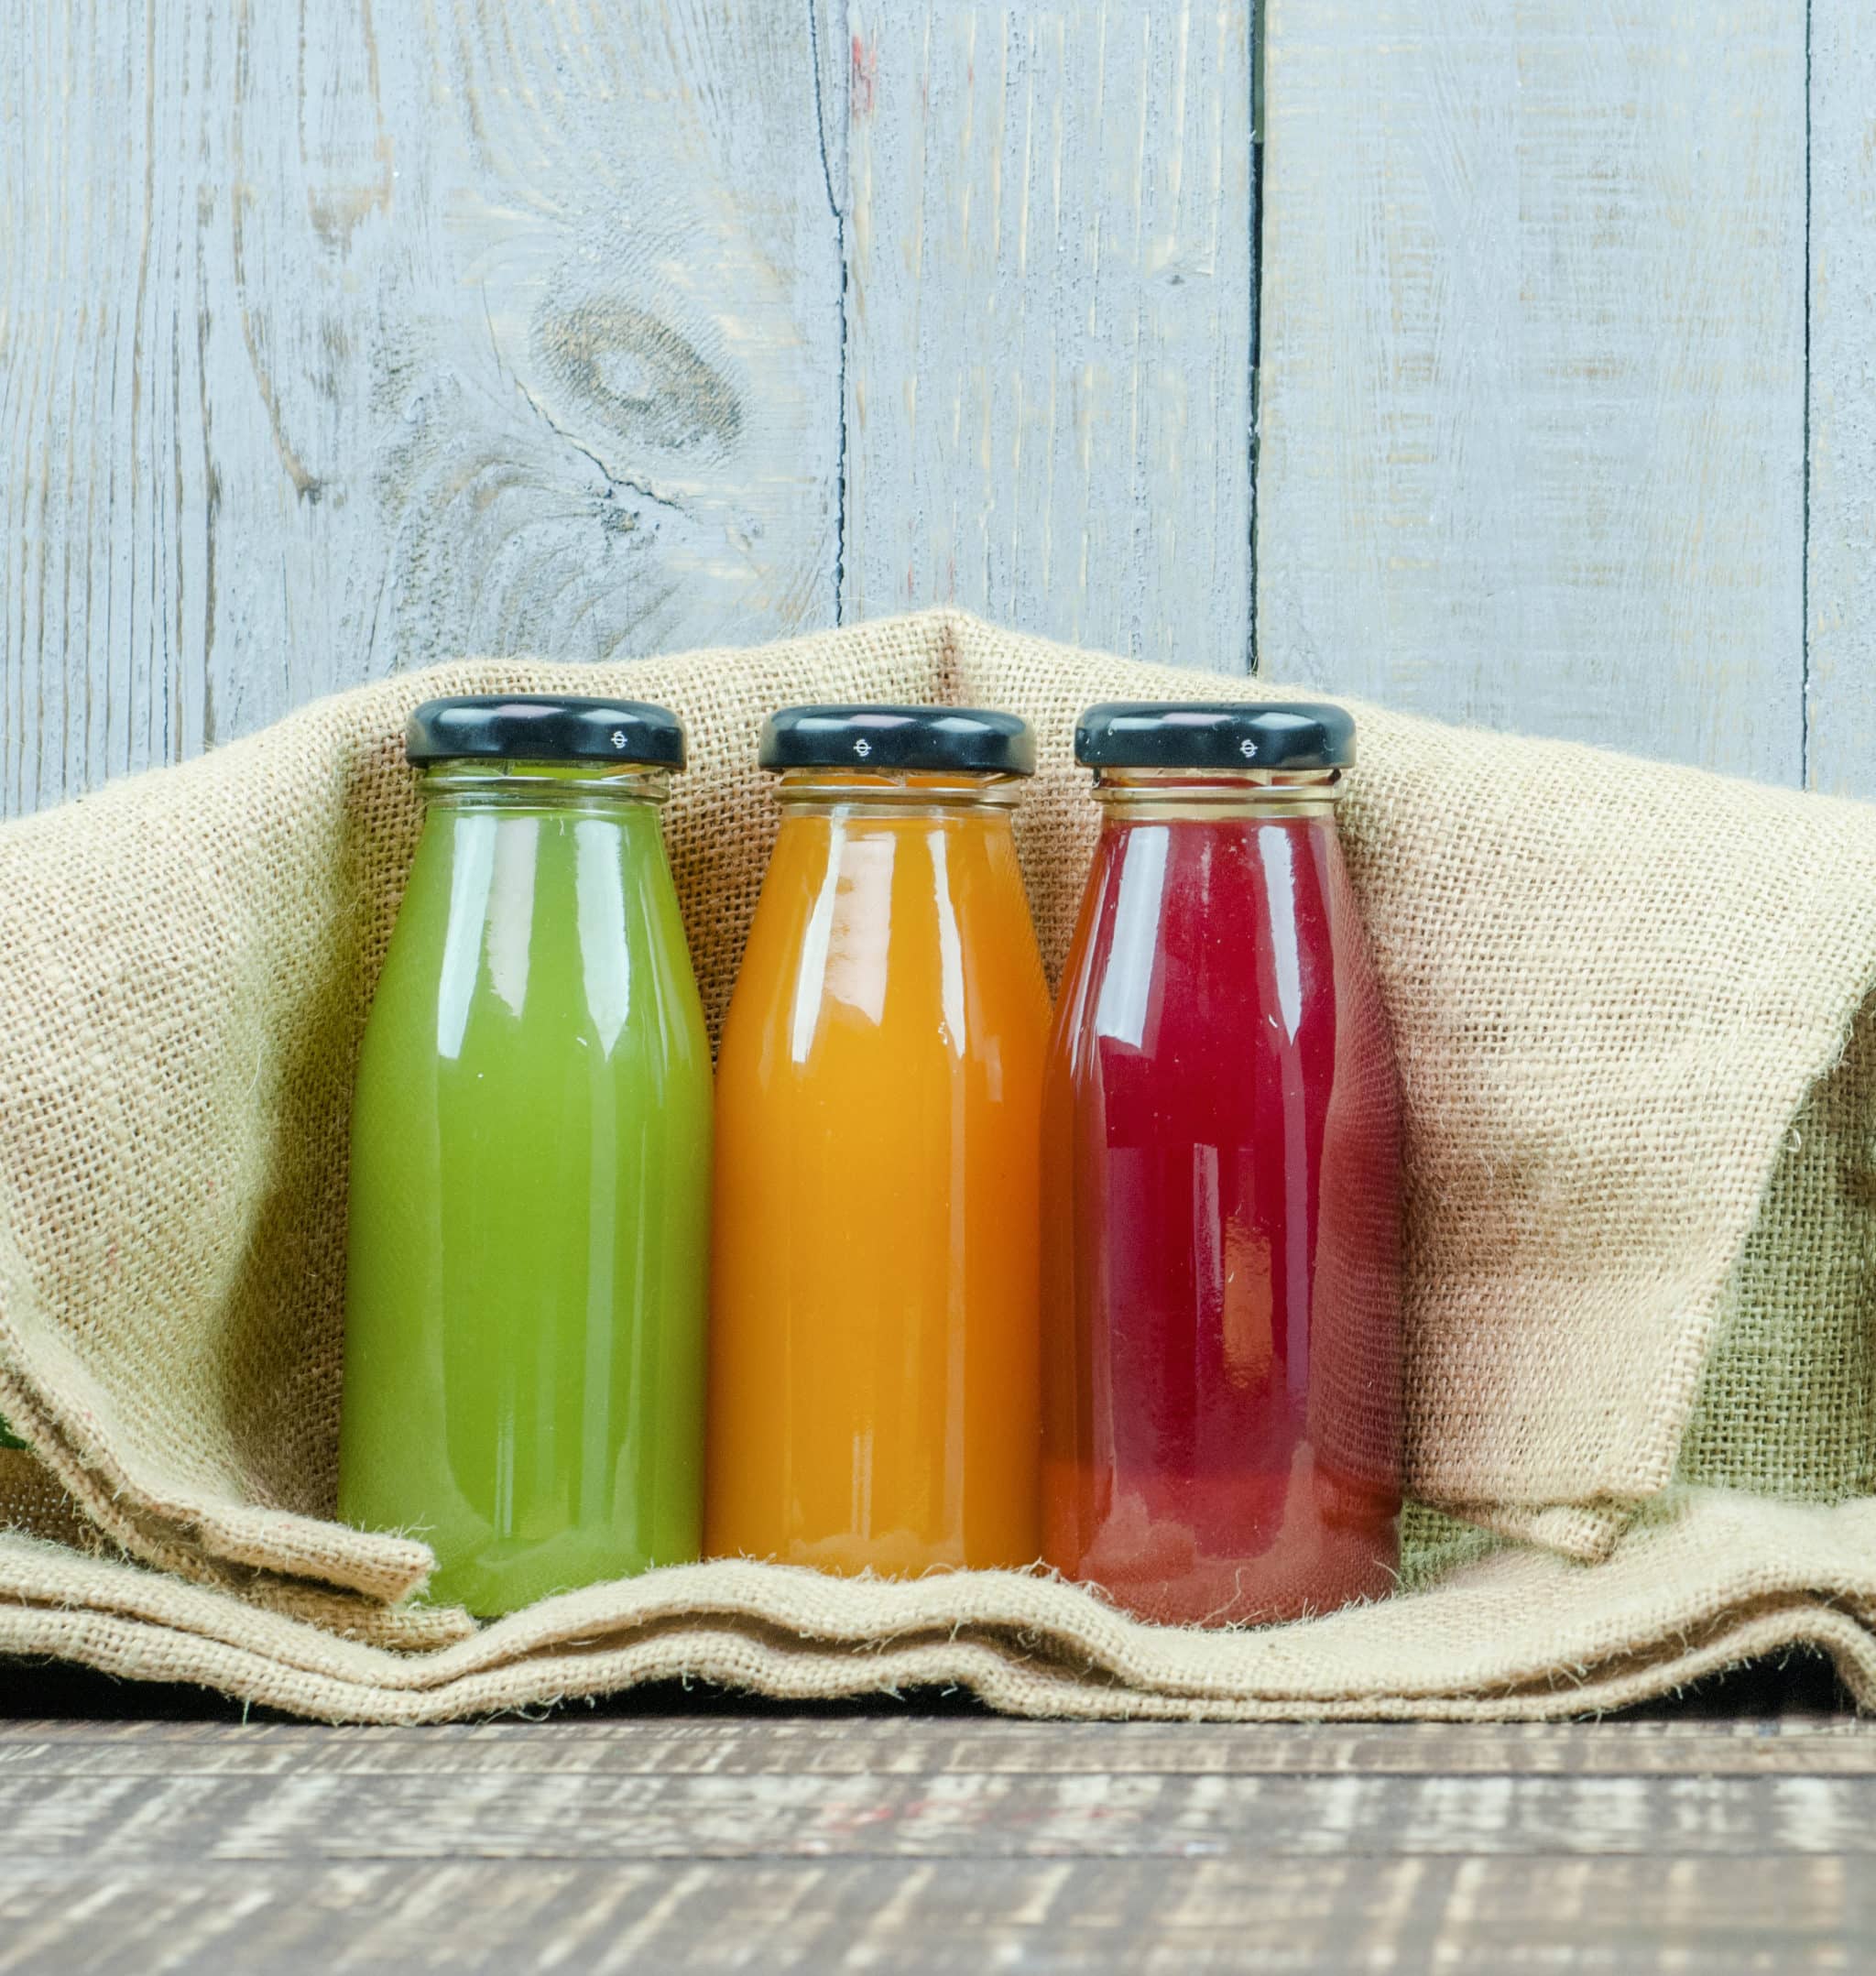 Should you juice? Or should you blend? Find out which is better for you.